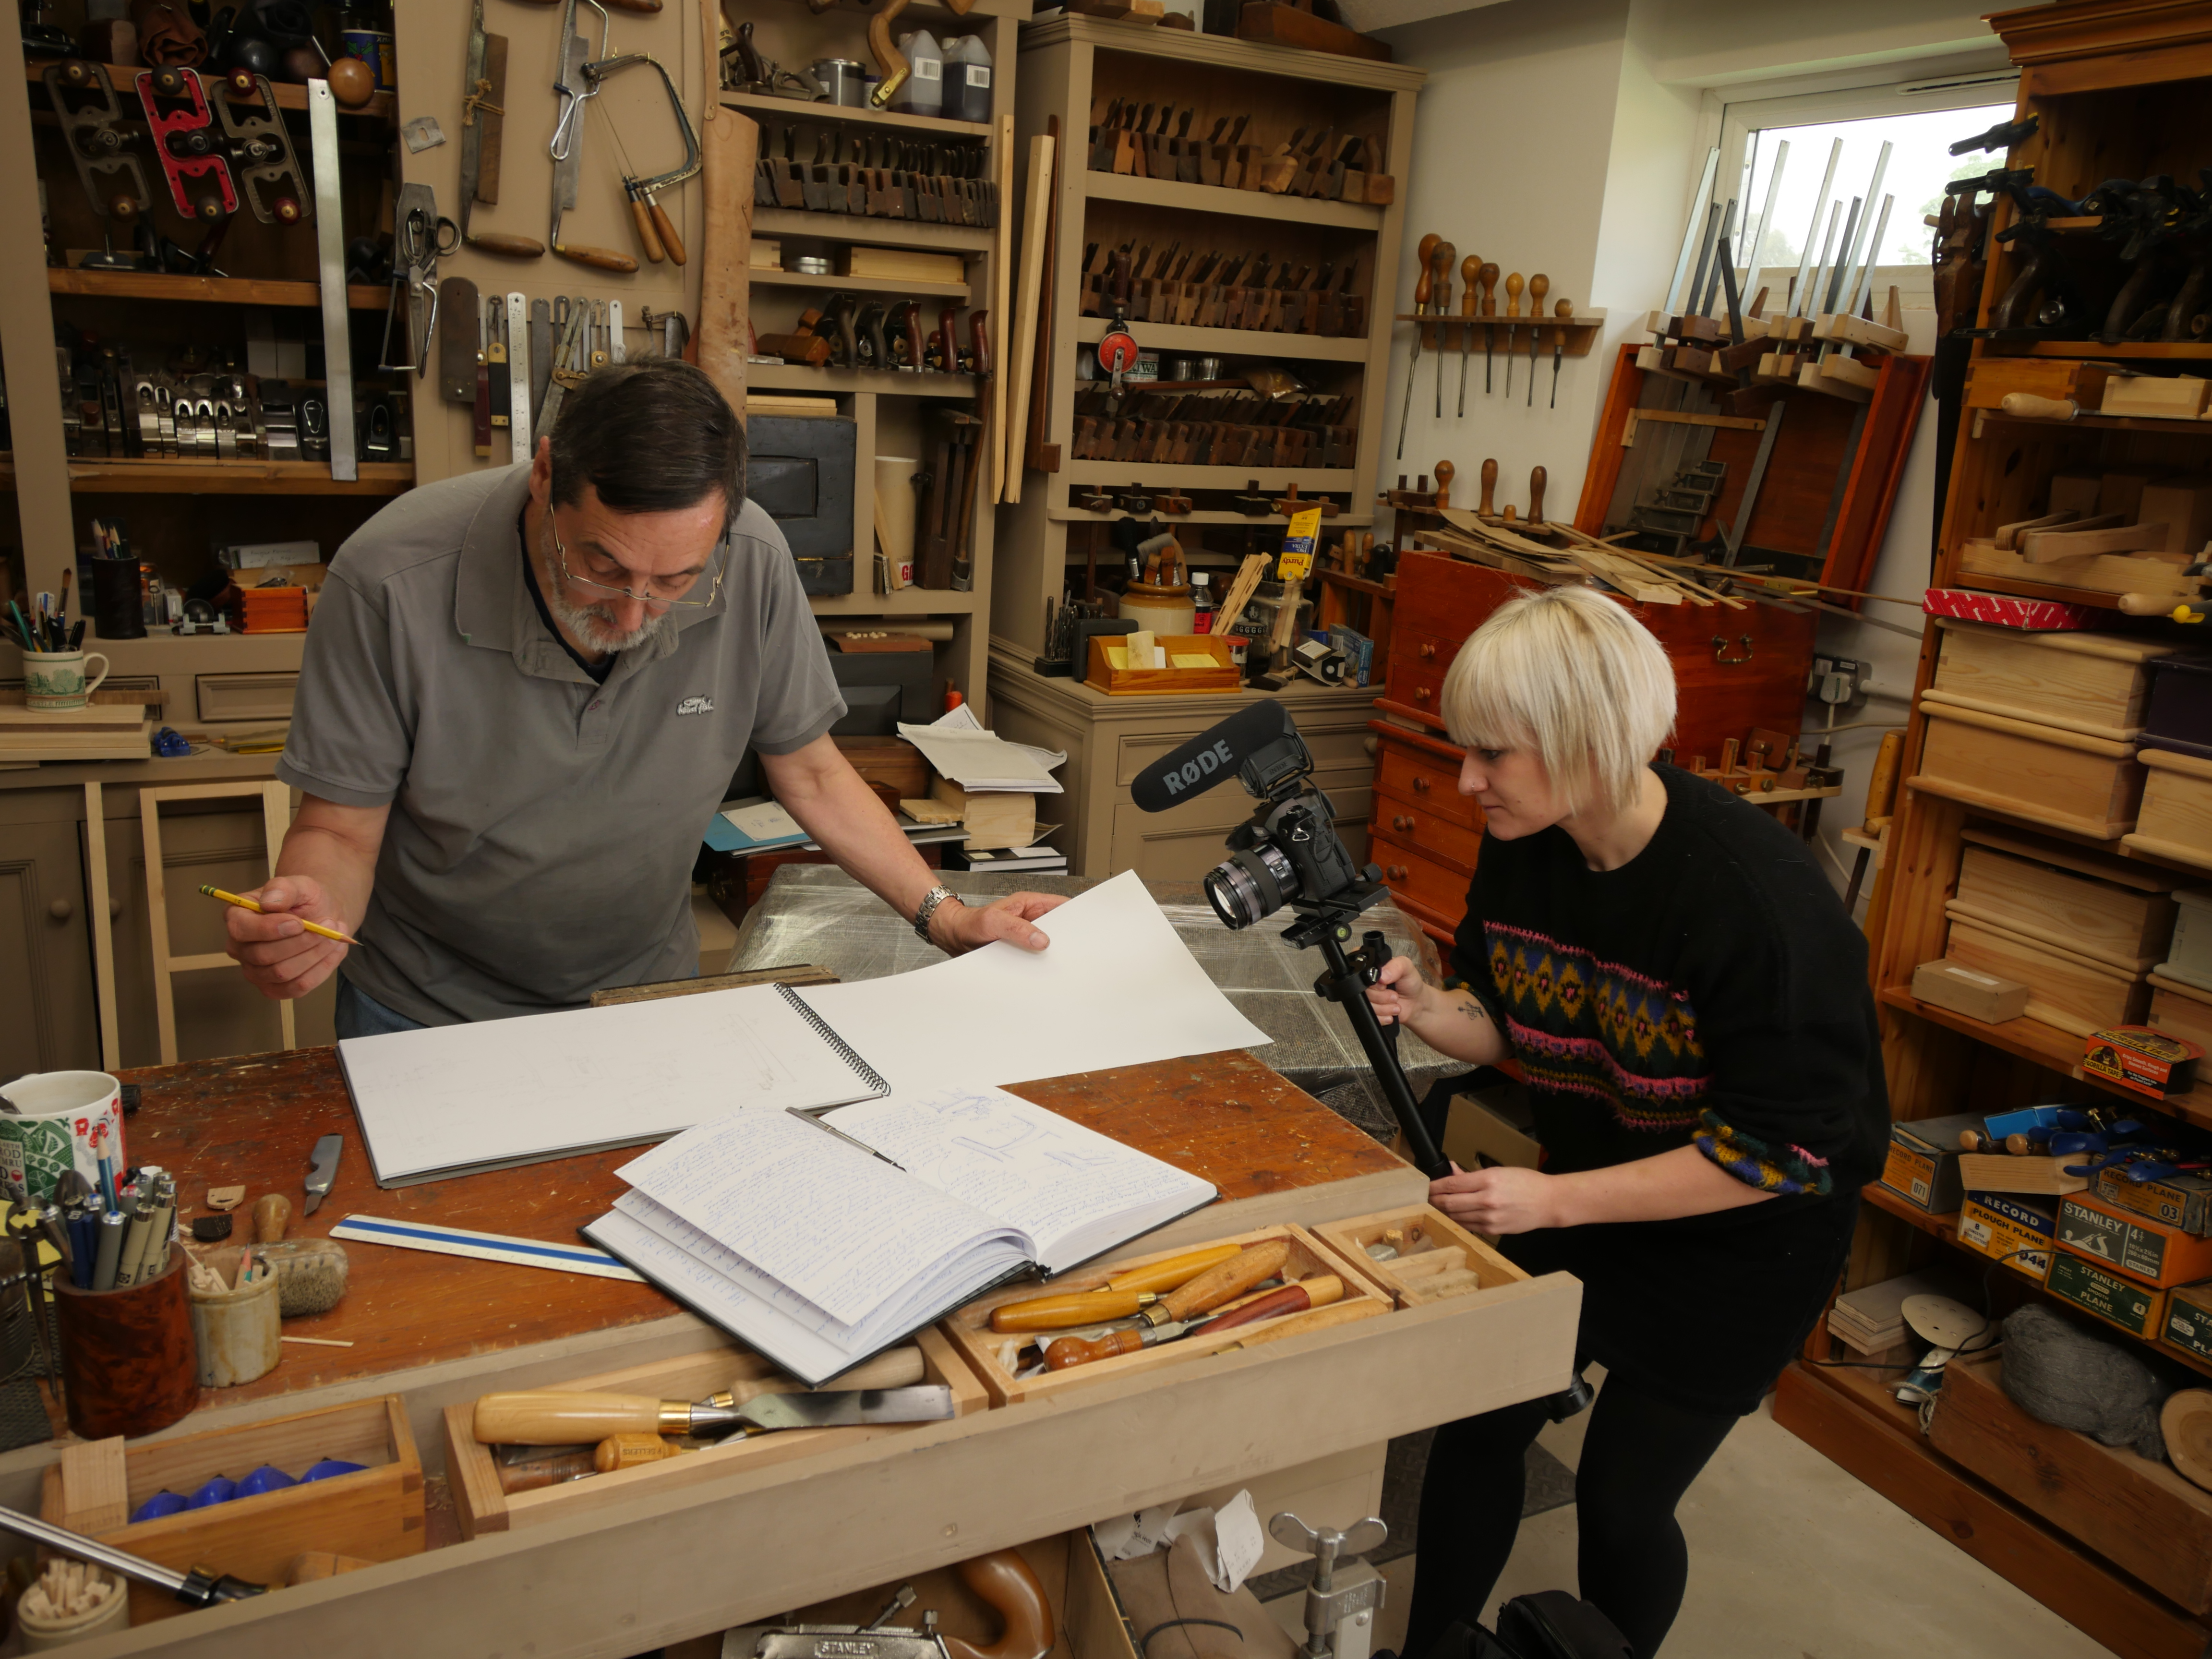 Eloise, Videographer at Woodworking Masterclasses